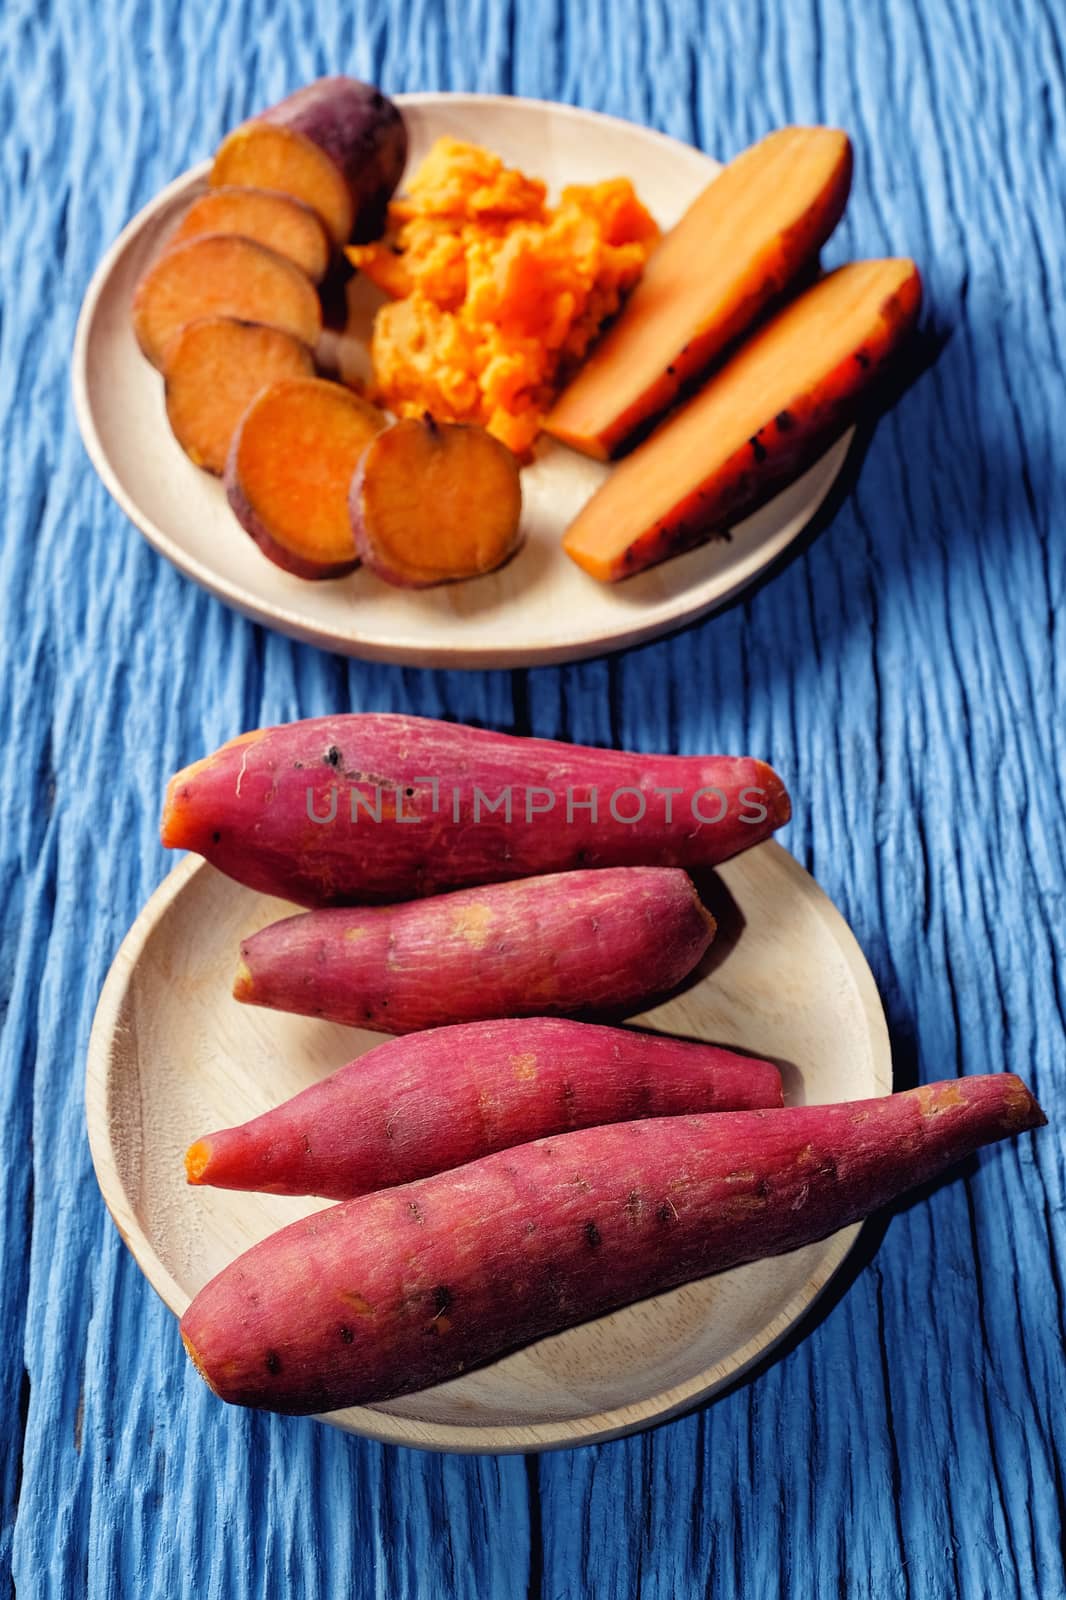 Sweet Potato on wooden cutting broad with blue wood background by Surasak